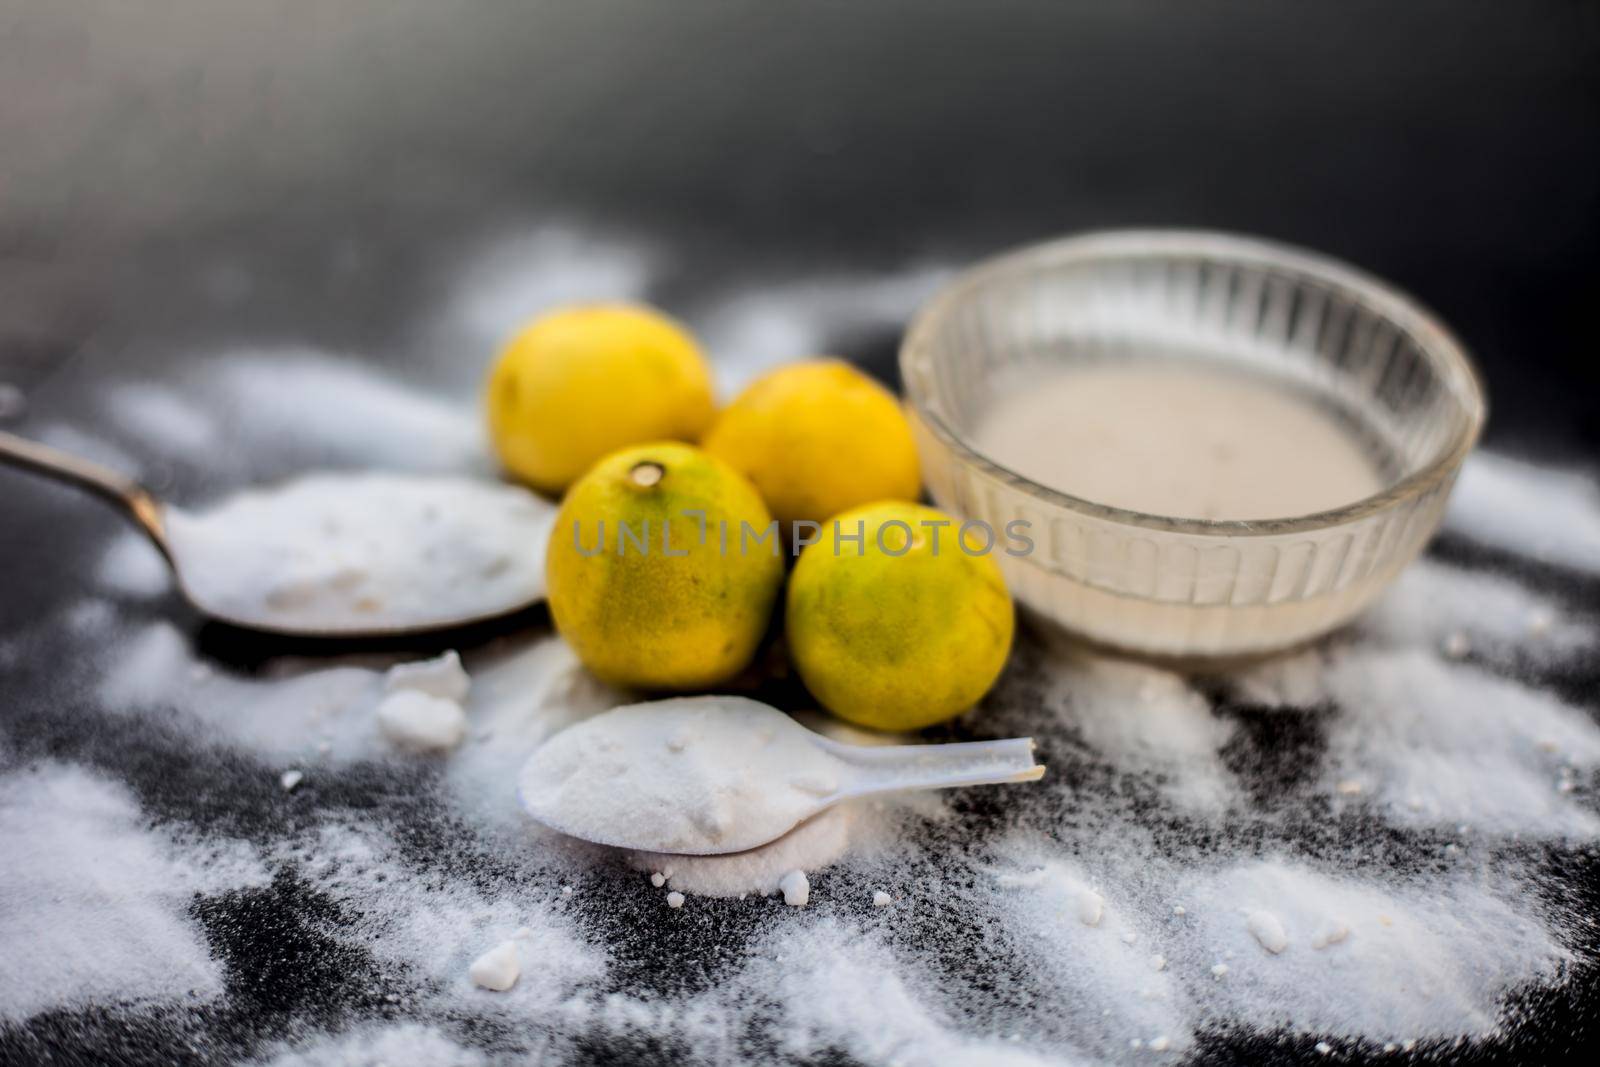 Baking soda face mask in a glass bowl on wooden surface along with some baking soda sprinkled on the surface and lemons also on surface. Used to blemishes skin instantly. by mirzamlk